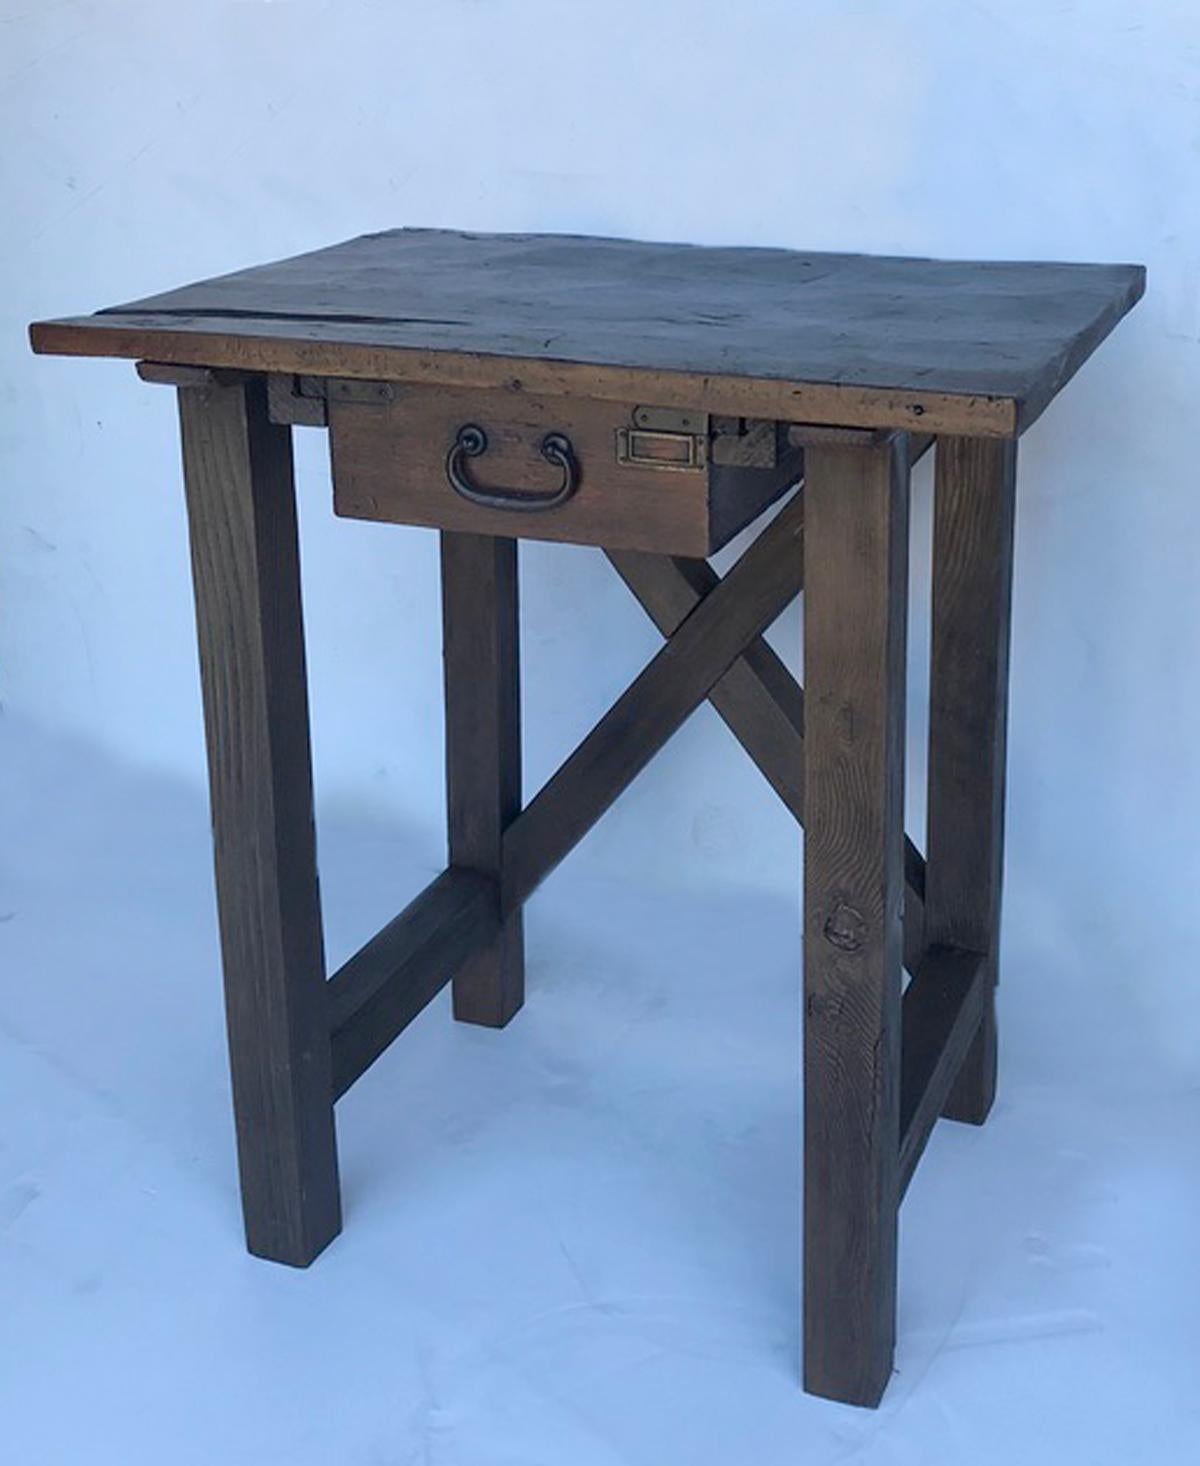 Rustic Reclaimed Wood Side Tables or Nightstands with Drawers